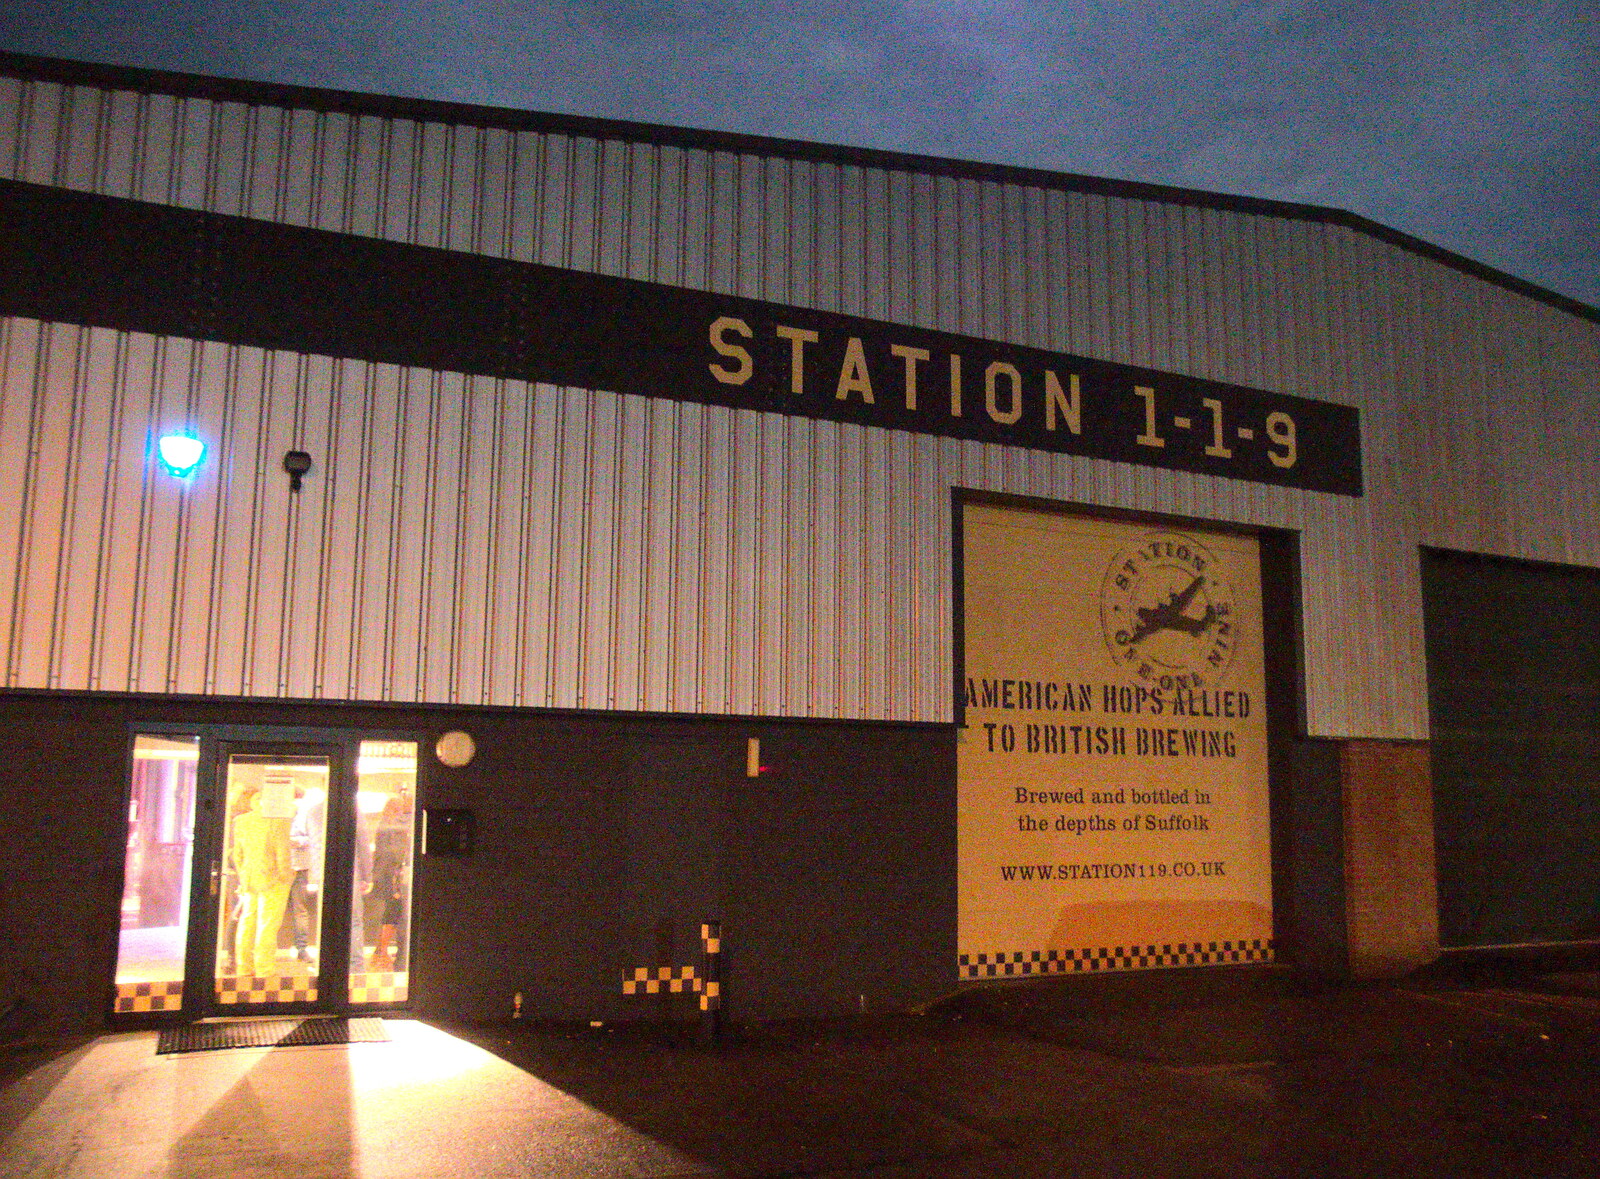 The Station 1-1-9 warehouse from Elvis Lives! (in a Brewery), Station 119, Eye, Suffolk - 29th March 2018